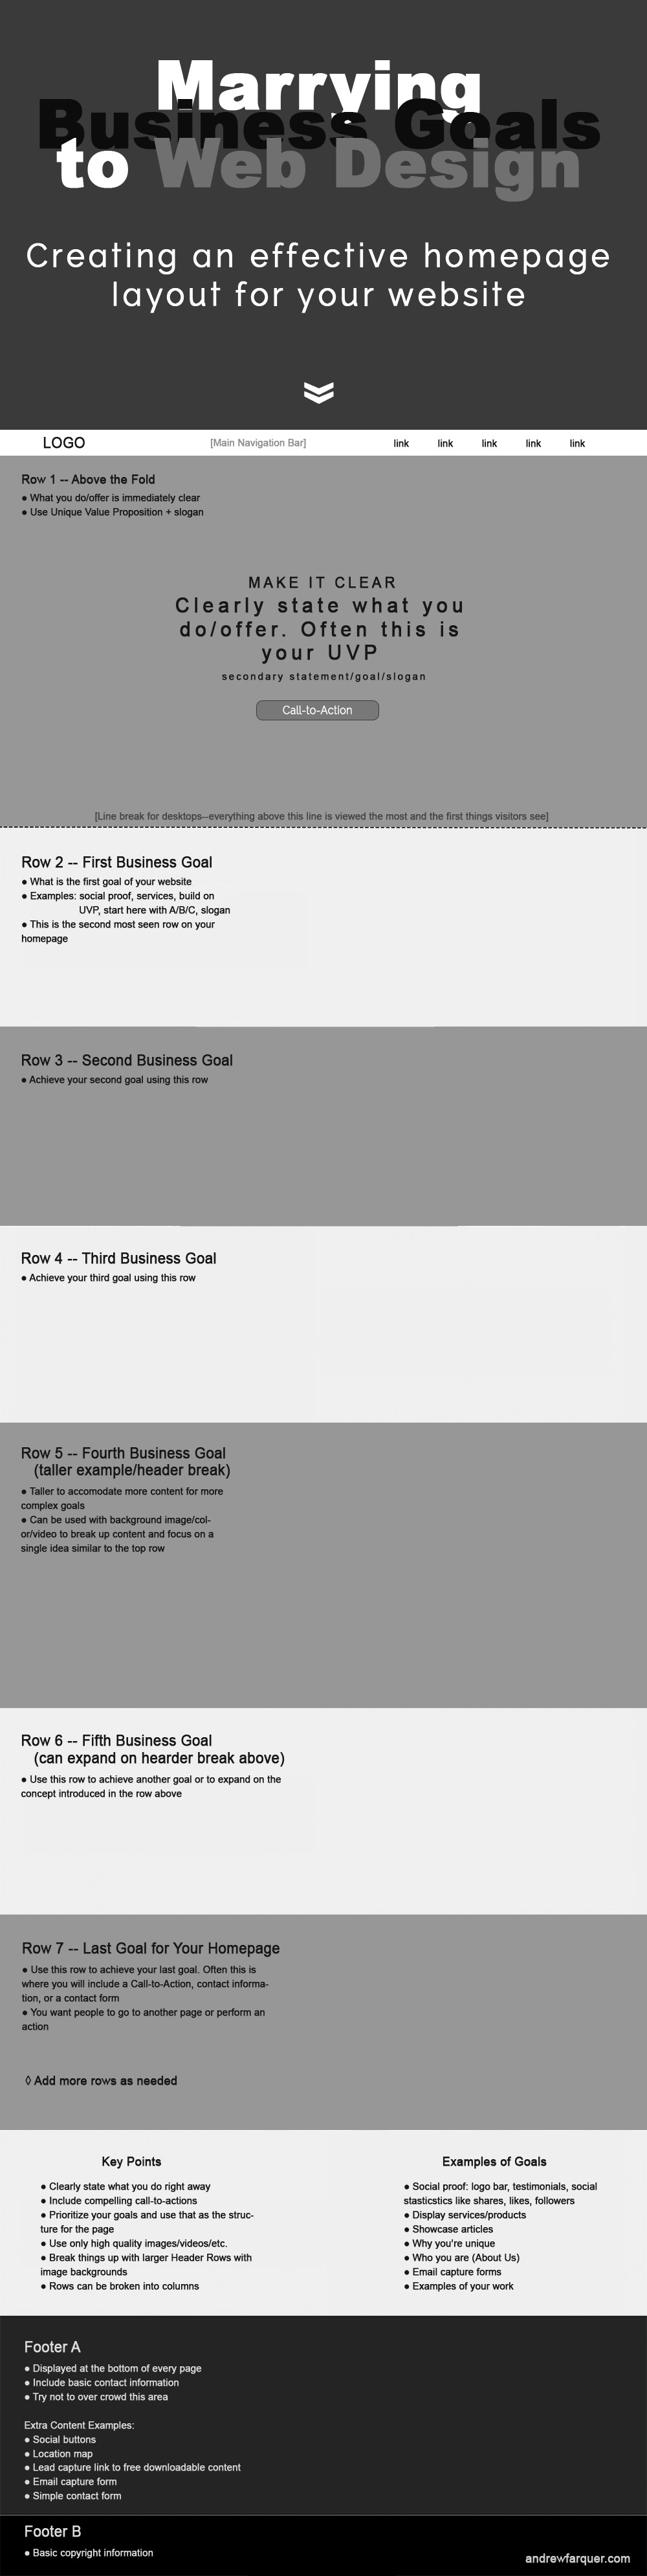 business goals to web design infographic by andrew farquer